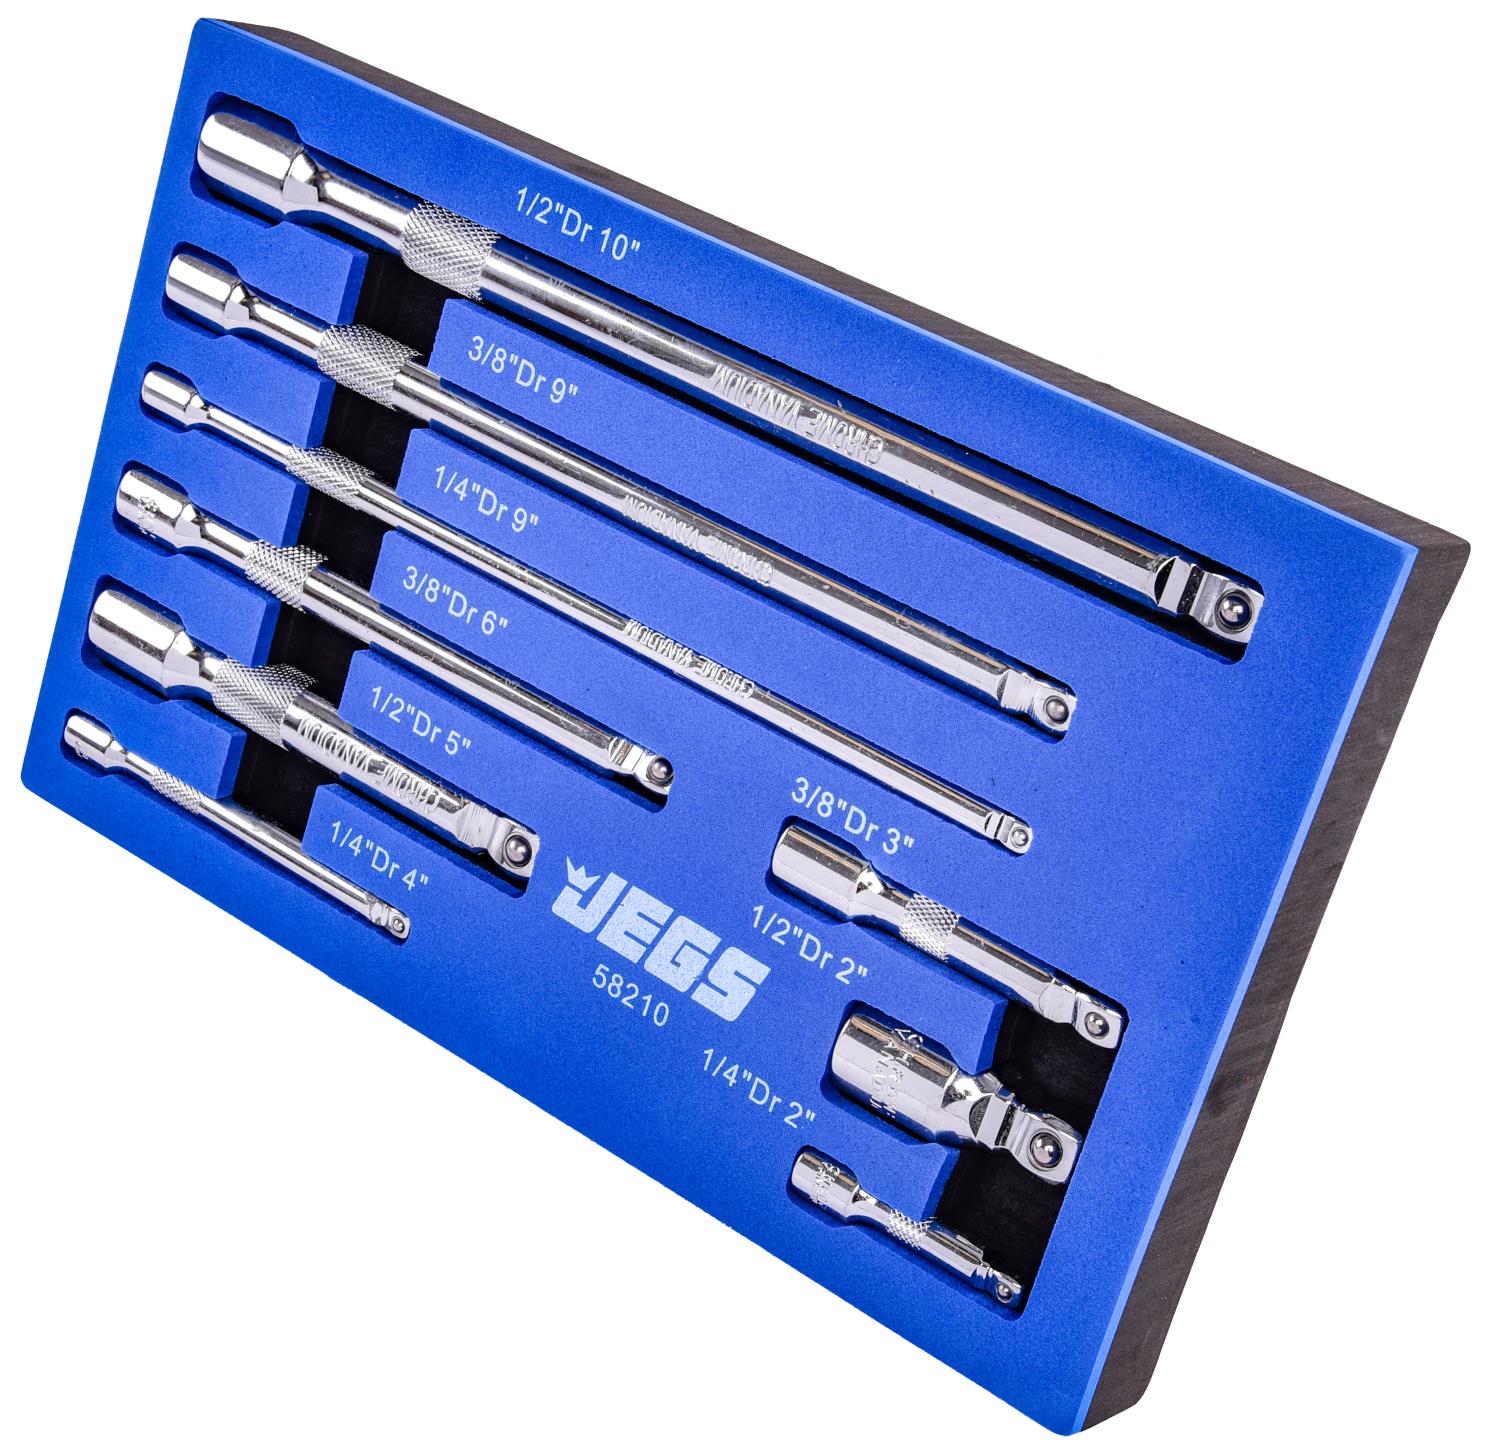 Wobble Extension Set, 1/4 in., 3/8 in. & 1/2 in. Drives [9-Piece]